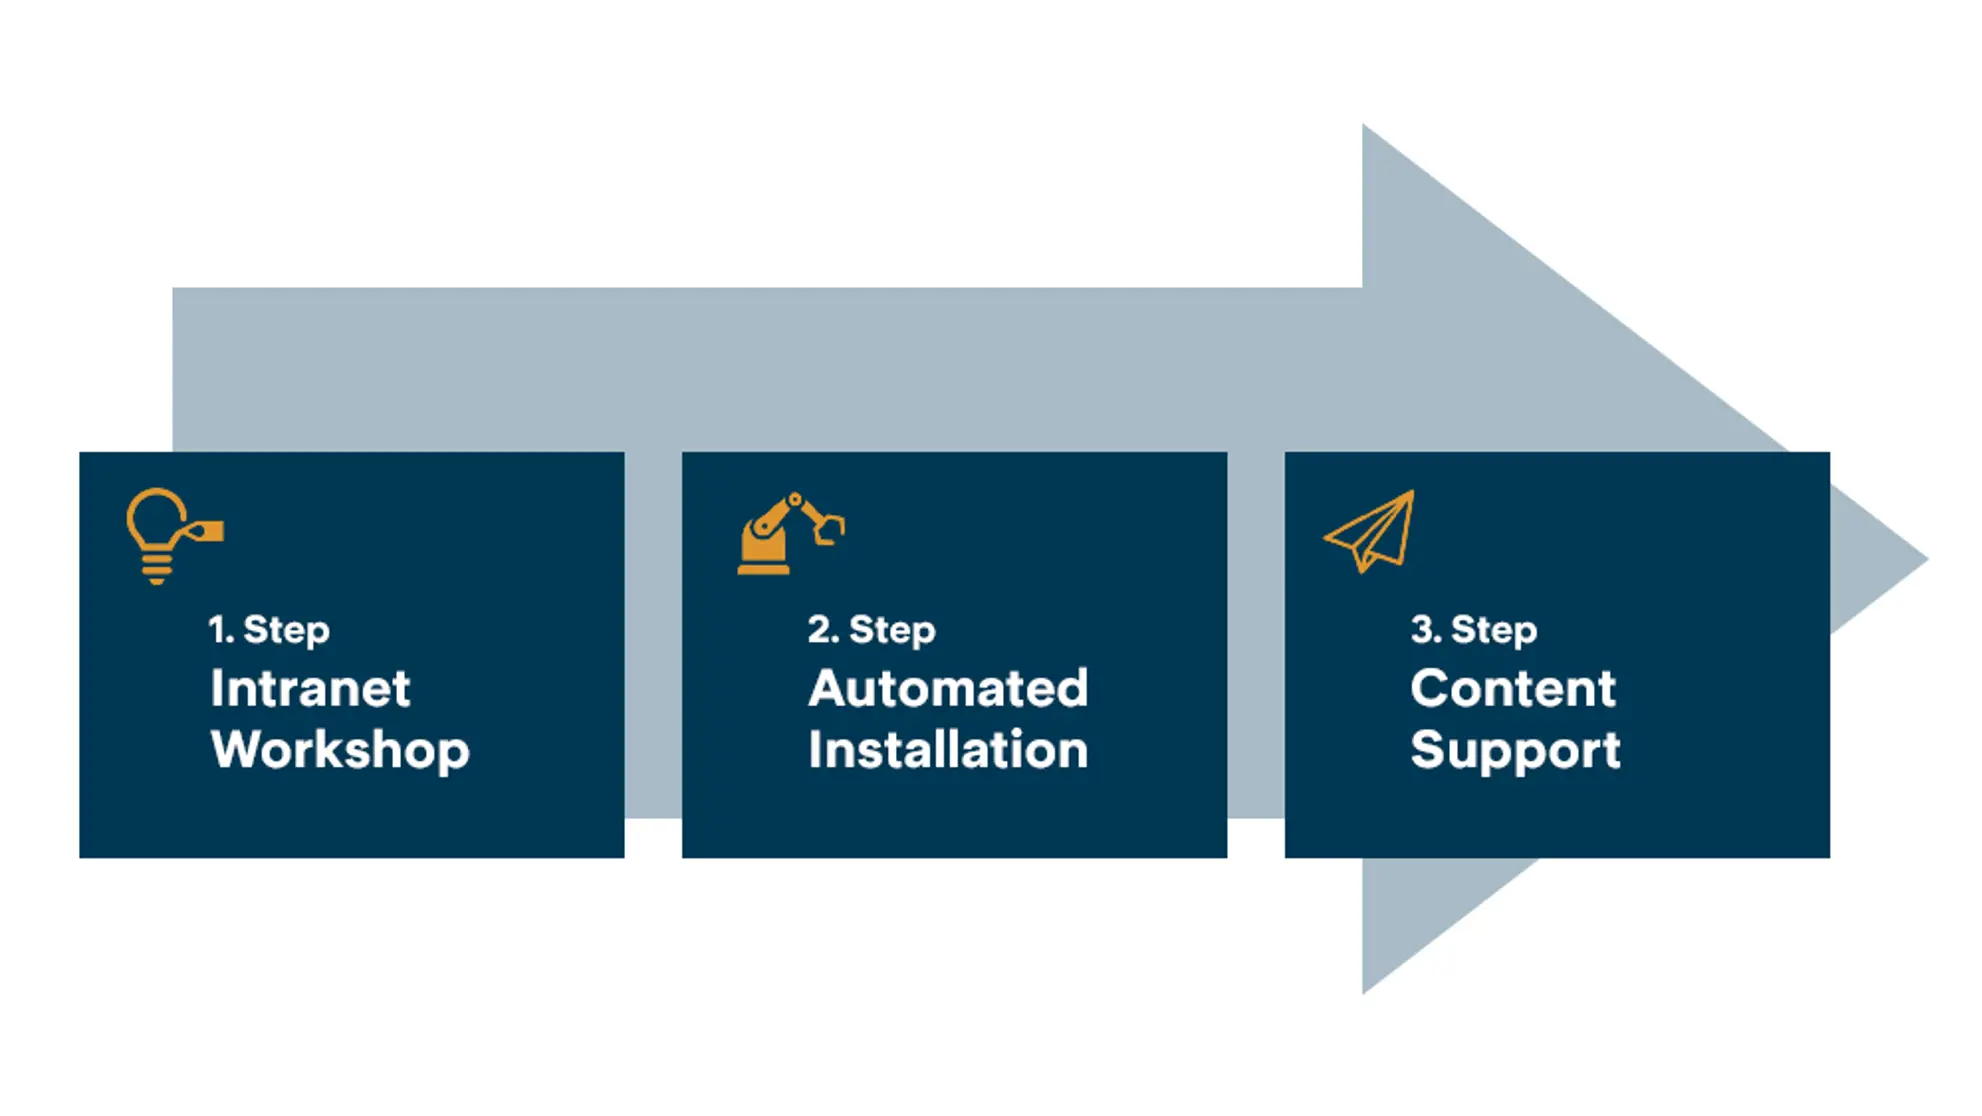 Description of 3 Steps to Intranet SharePoint Solutions